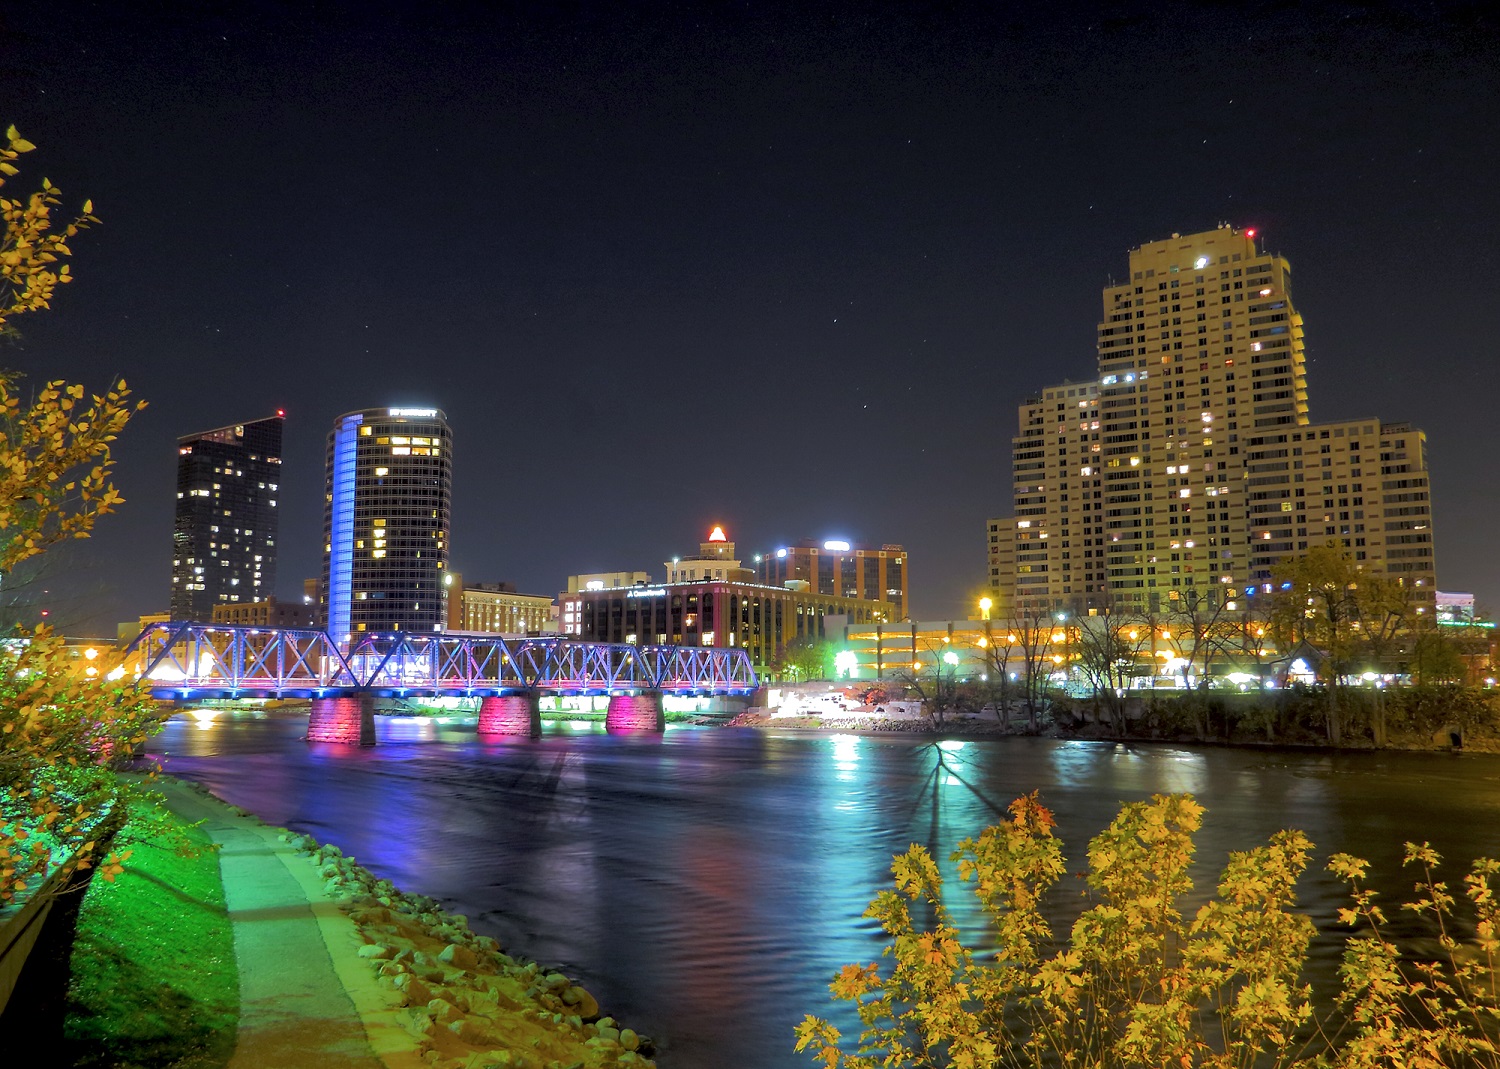 Grand Rapids' iconic Blue Bridge will be lit orange in support of Hunger Action Month. Photo credit: Russell Sekeet